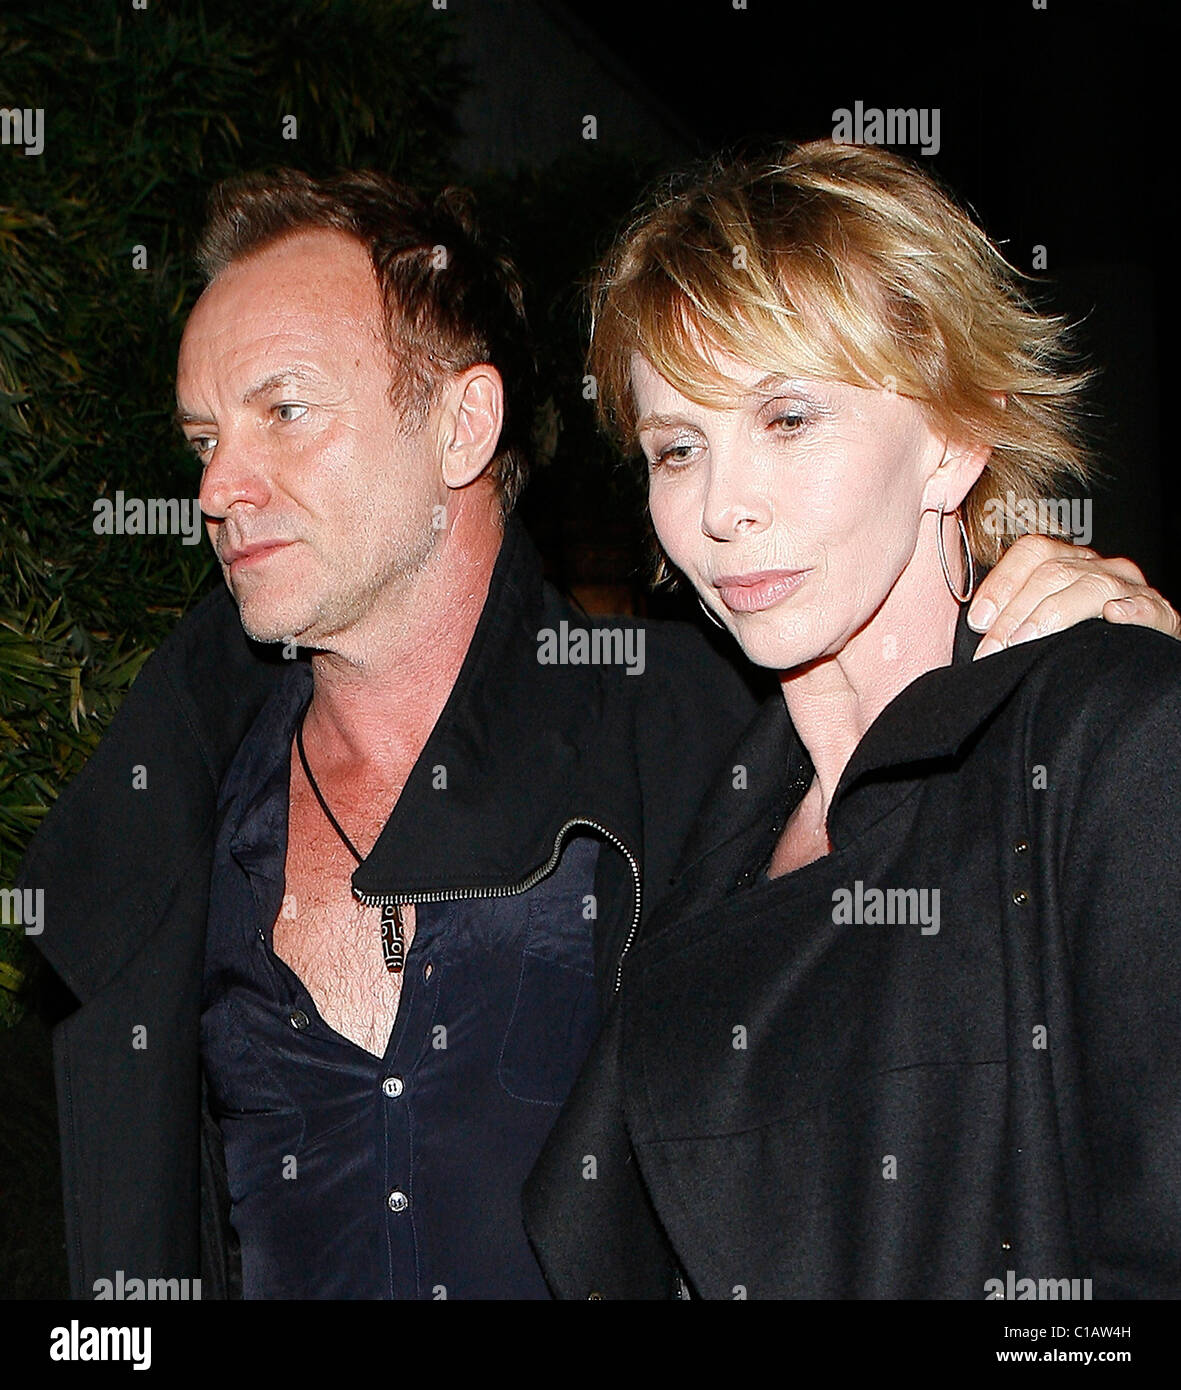 Sting and Trudie Styler at Chateau Marmont Los Angeles, California - 03.04.09 Stock Photo